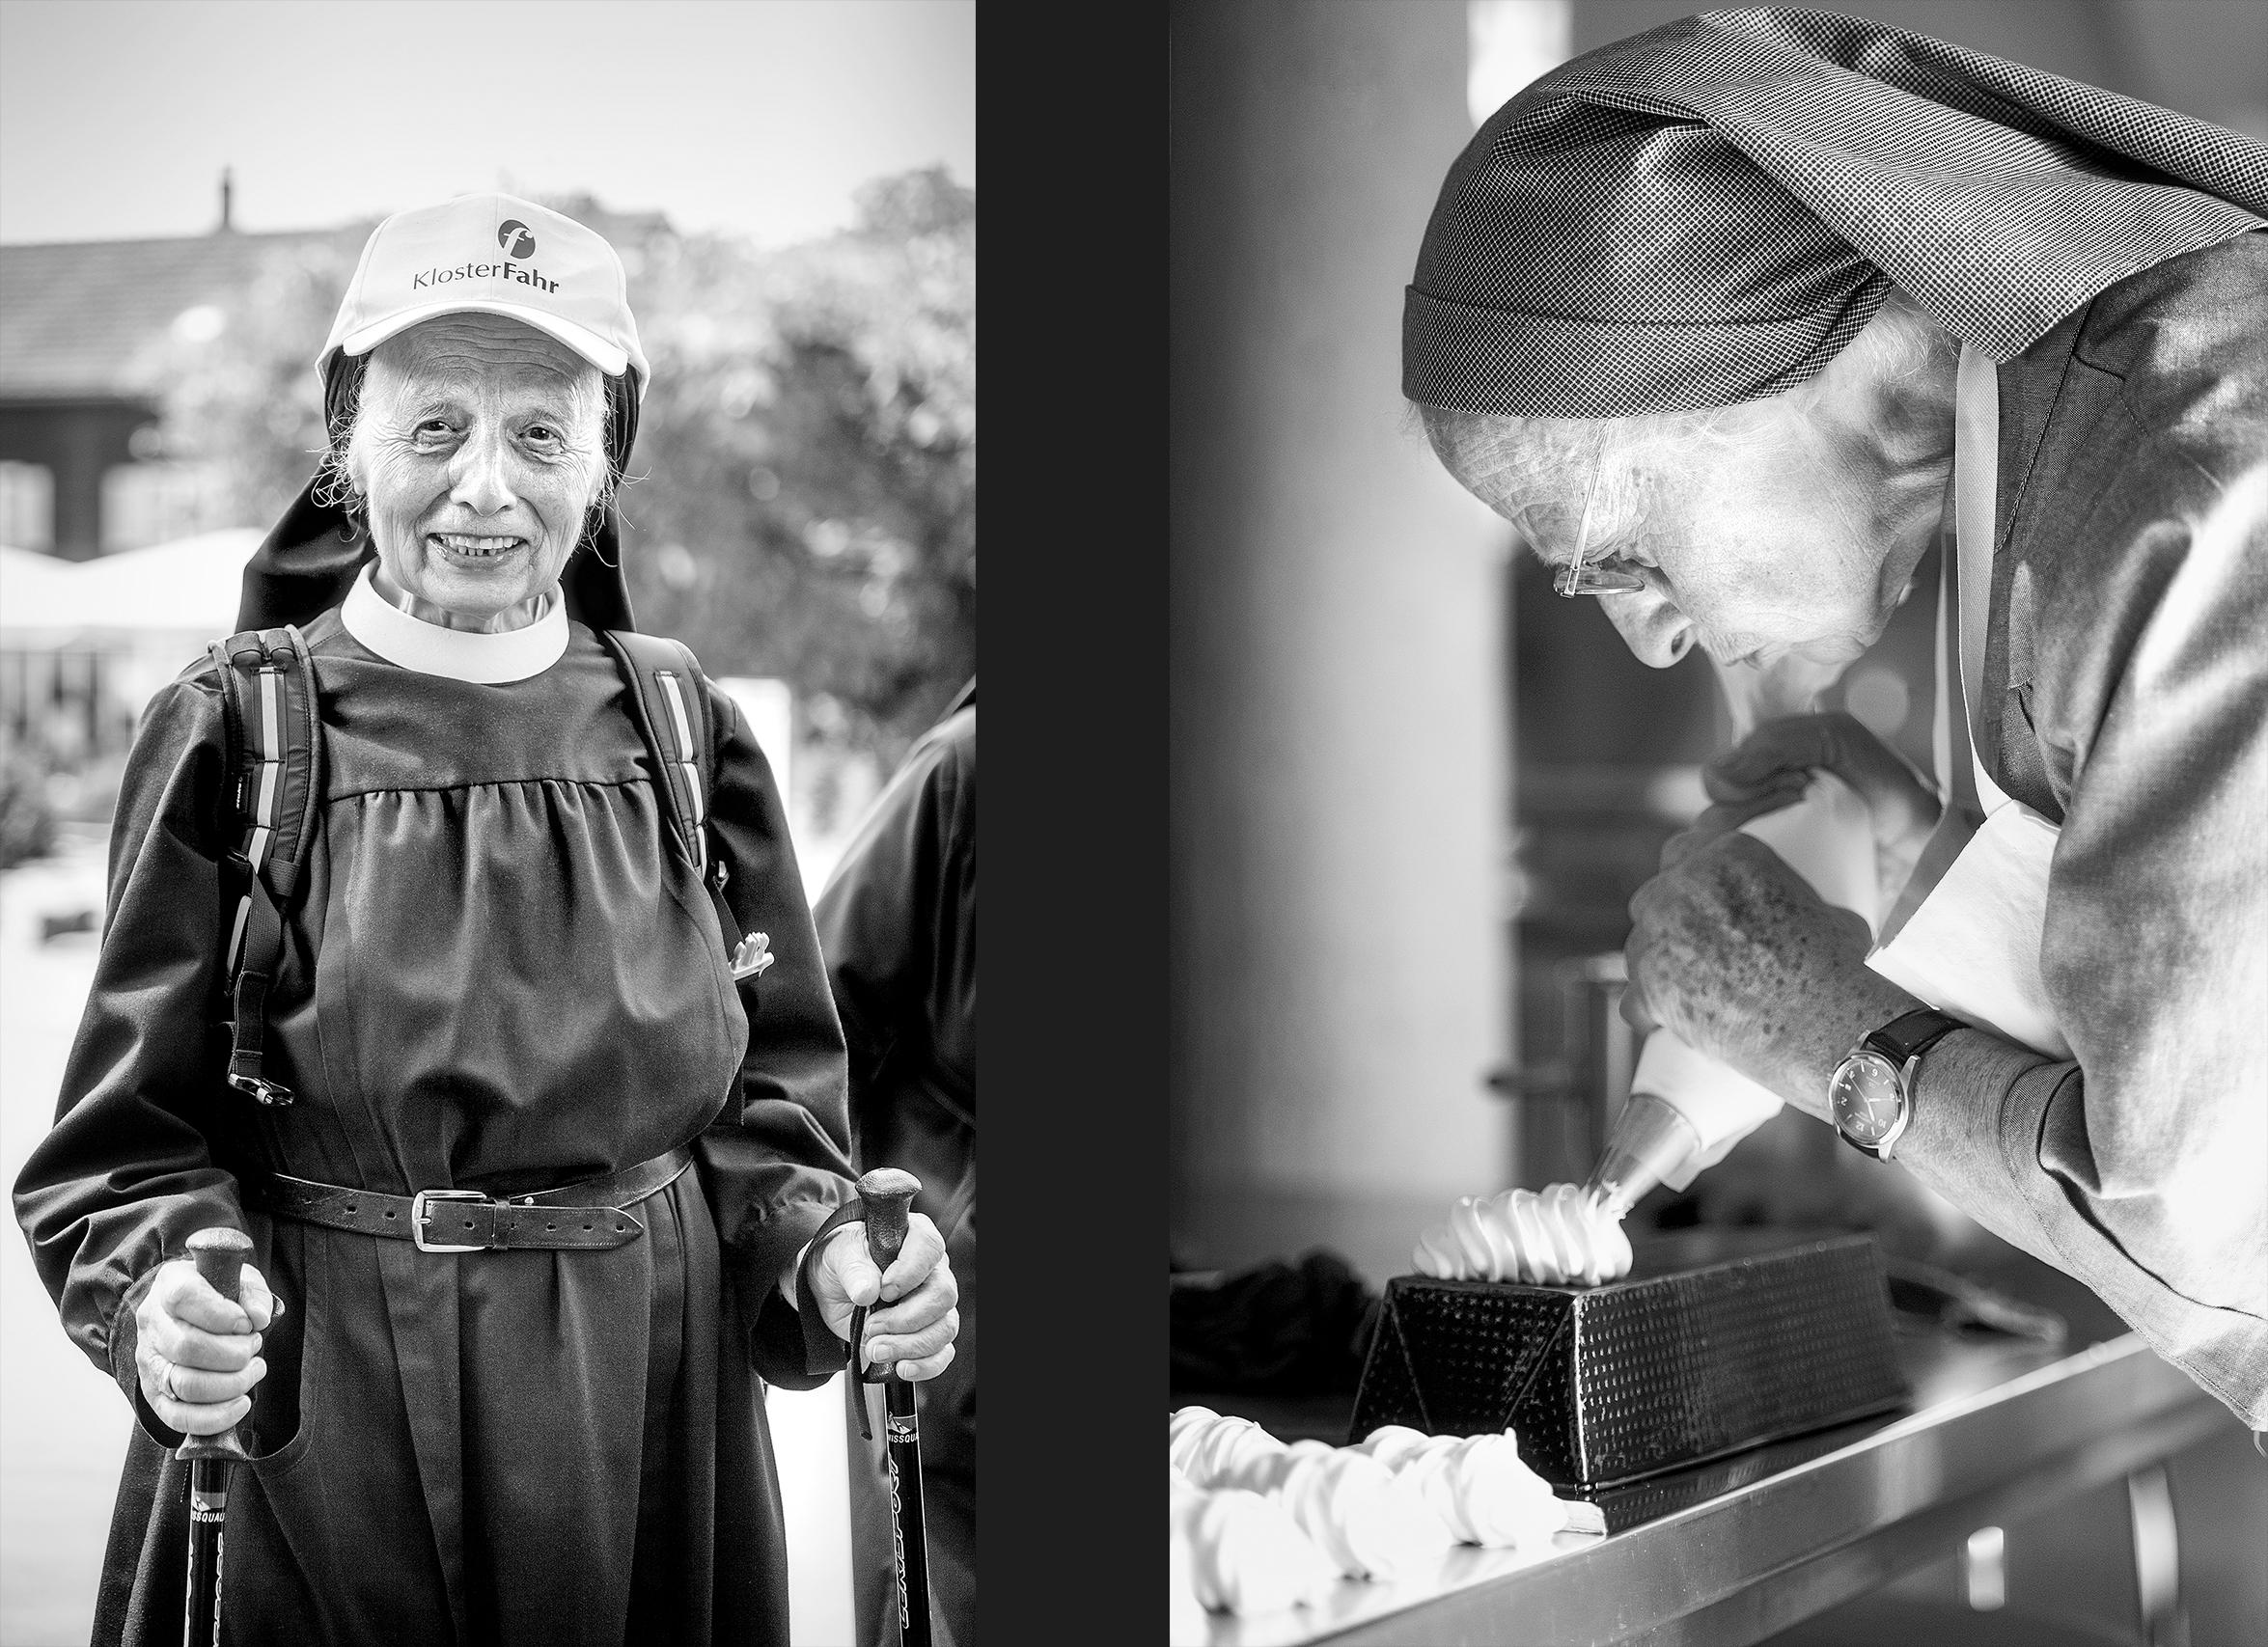 Nun with ruckstack and hiking sticks, working in the kitchen